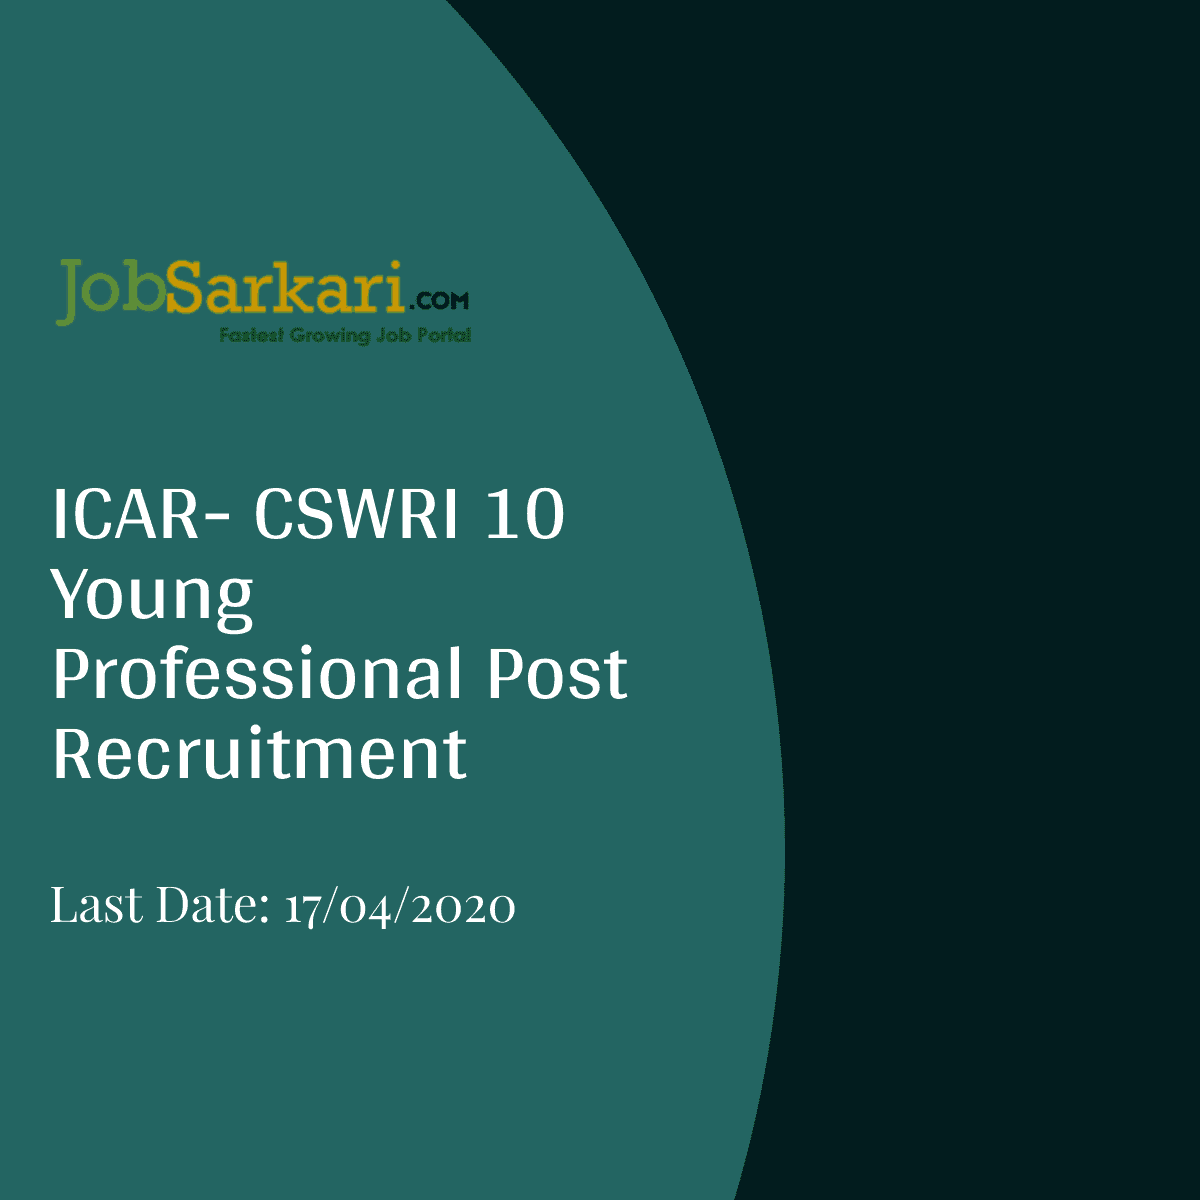 ICAR- CSWRI Recruitment 2020 For Young Professional Post 1